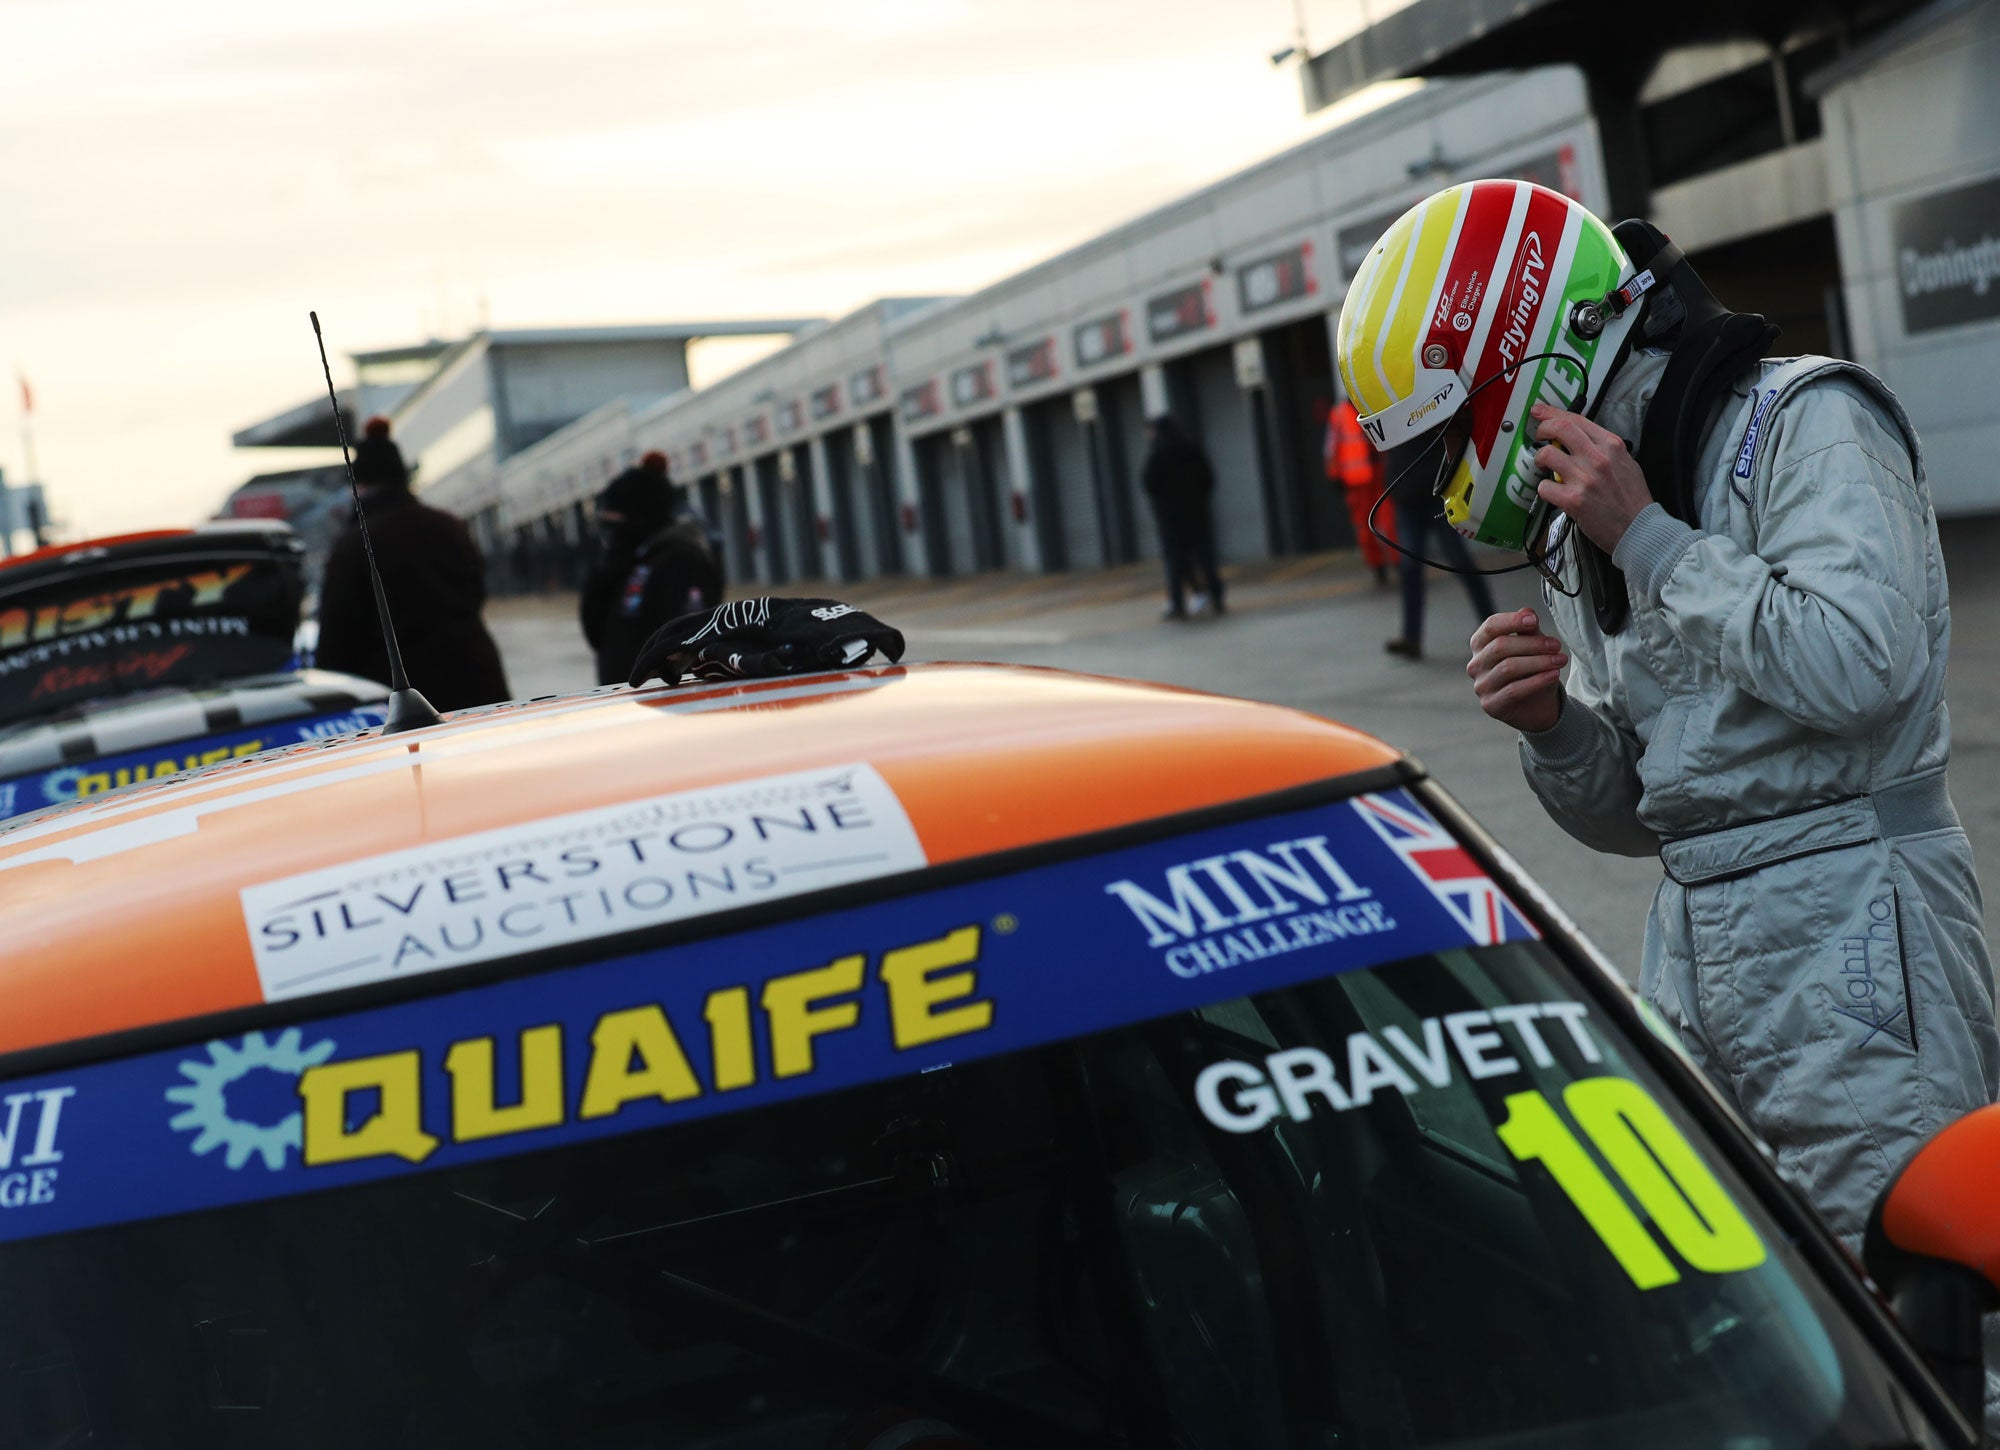 Bradley Gravett son of BTCC British Touring Car Champion Robb Gravett in the Cooper Trophy at Donington in 2020 Standing by Car Graves Motorsport Mini Challenge JCW Cooper Racing Driver LIQUI MOLY LM Performance Thinking it Better